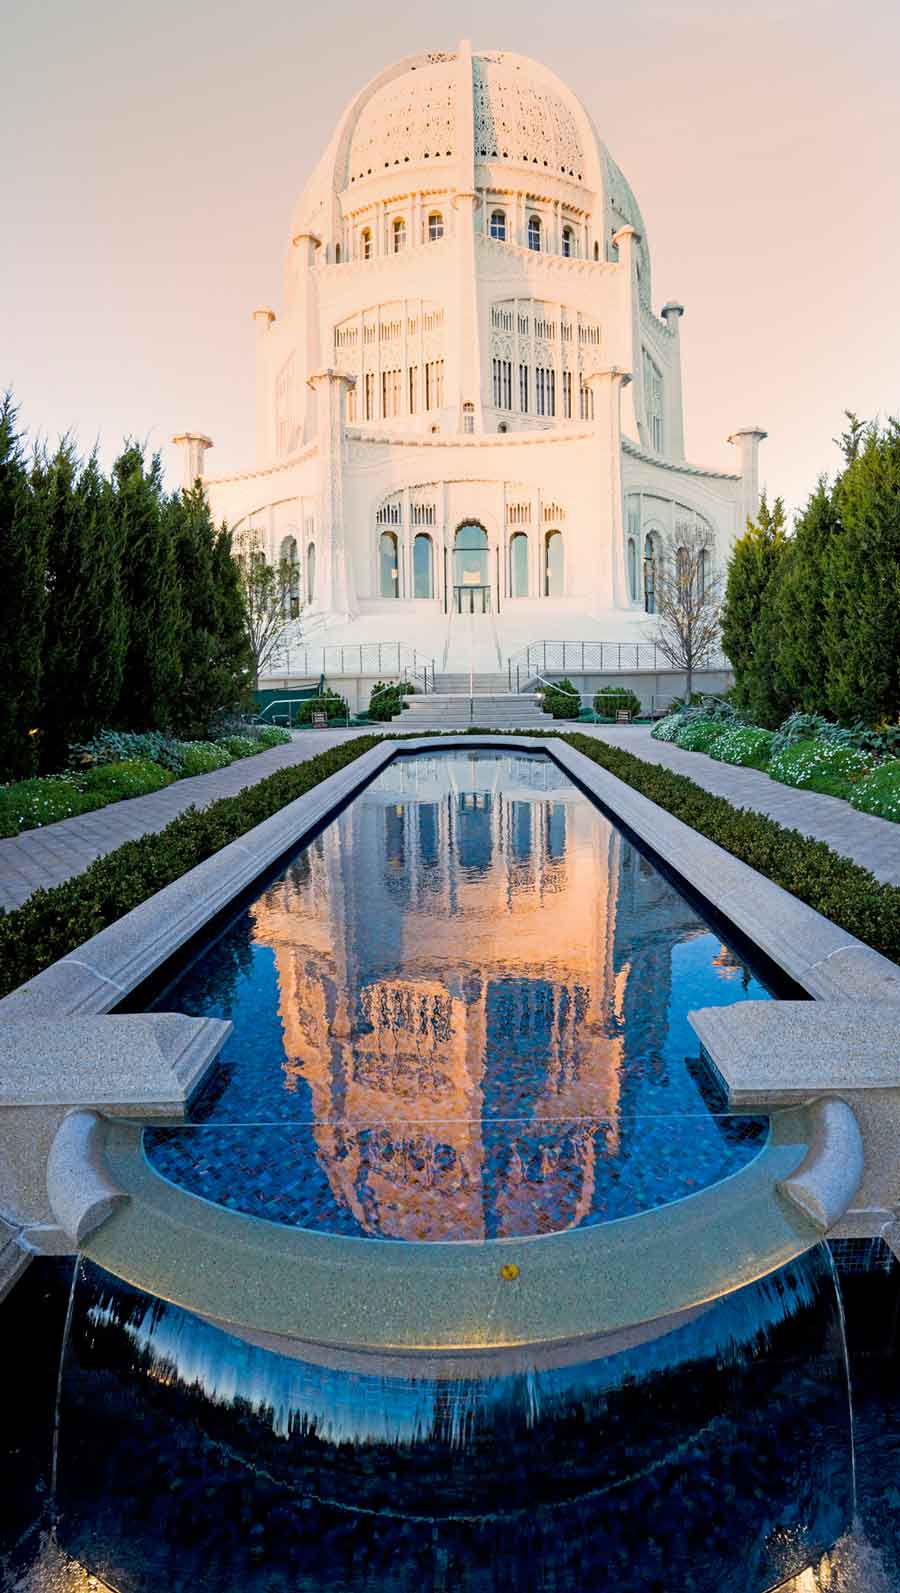 Baha’i House of Worship in Wilmette